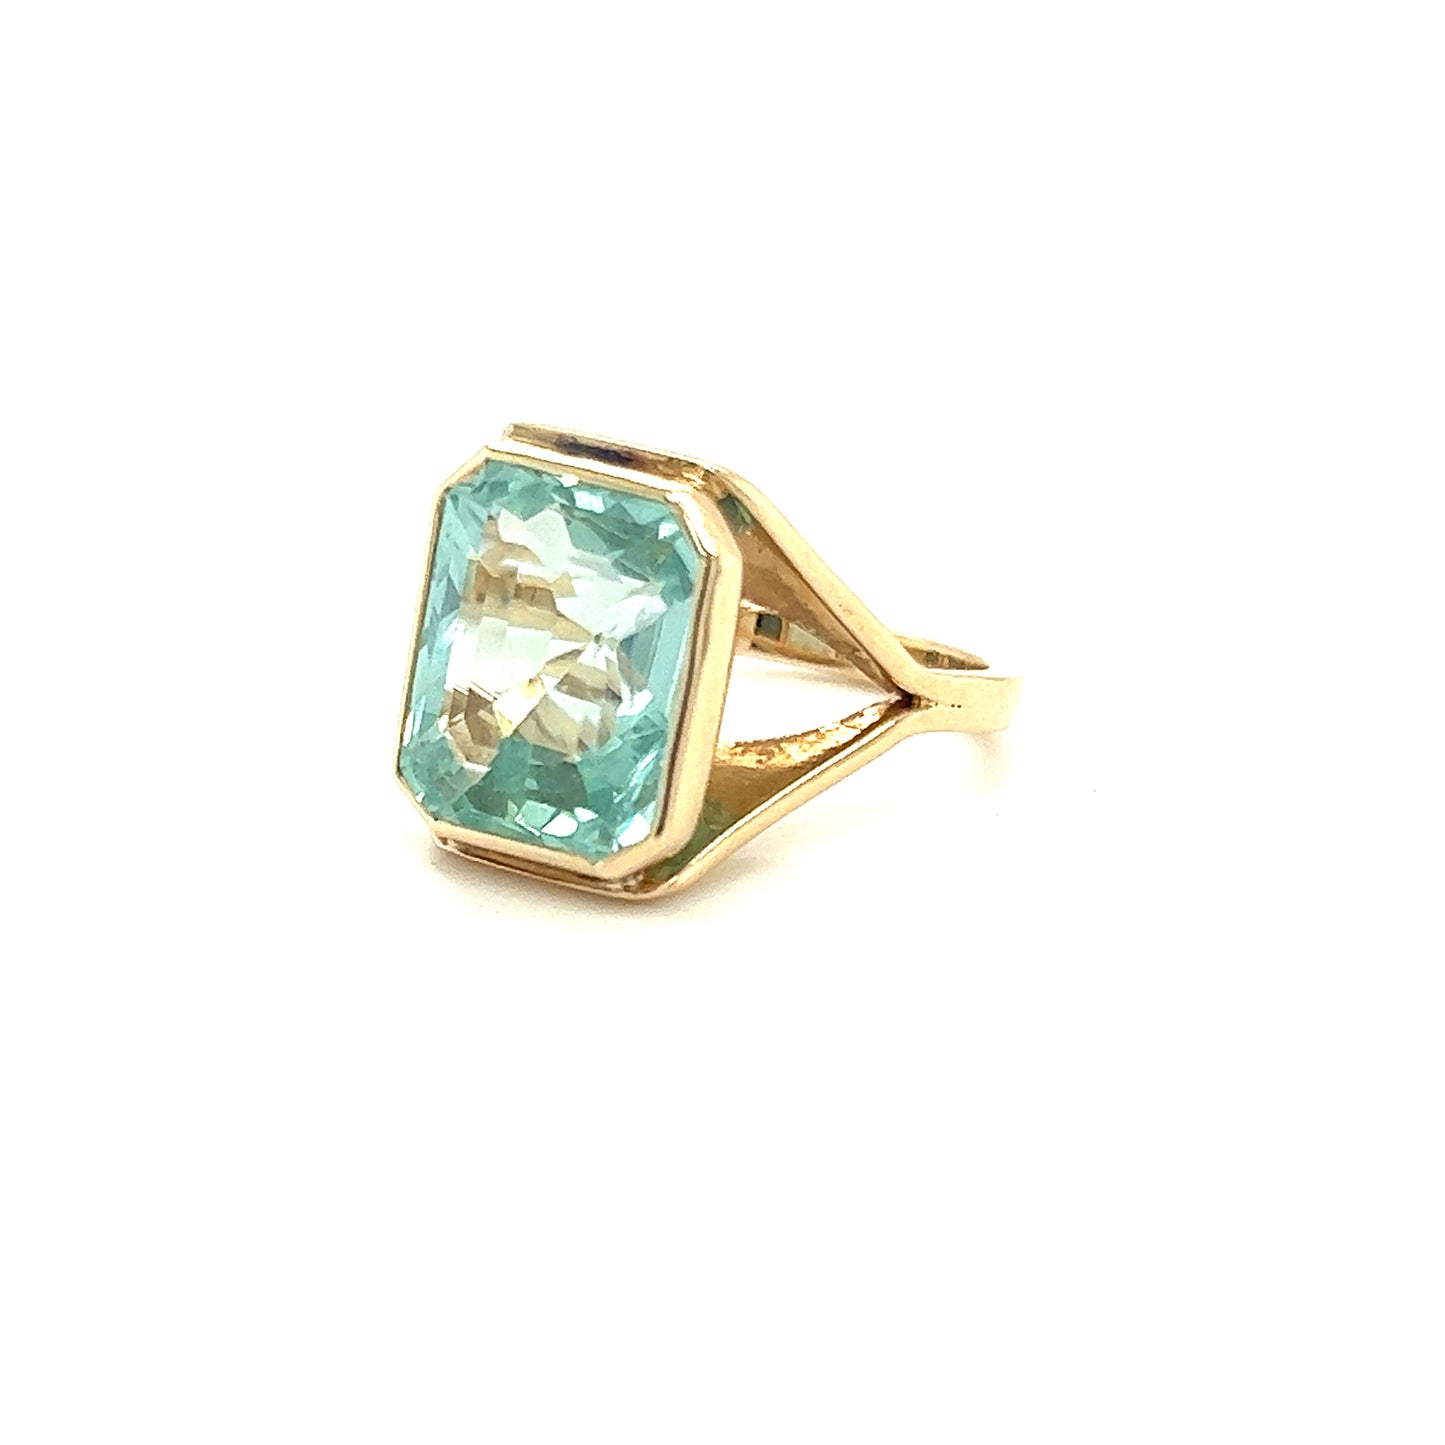 Blue Topaz Ring with Split Shank Setting in 14K Yellow Gold Right Side View